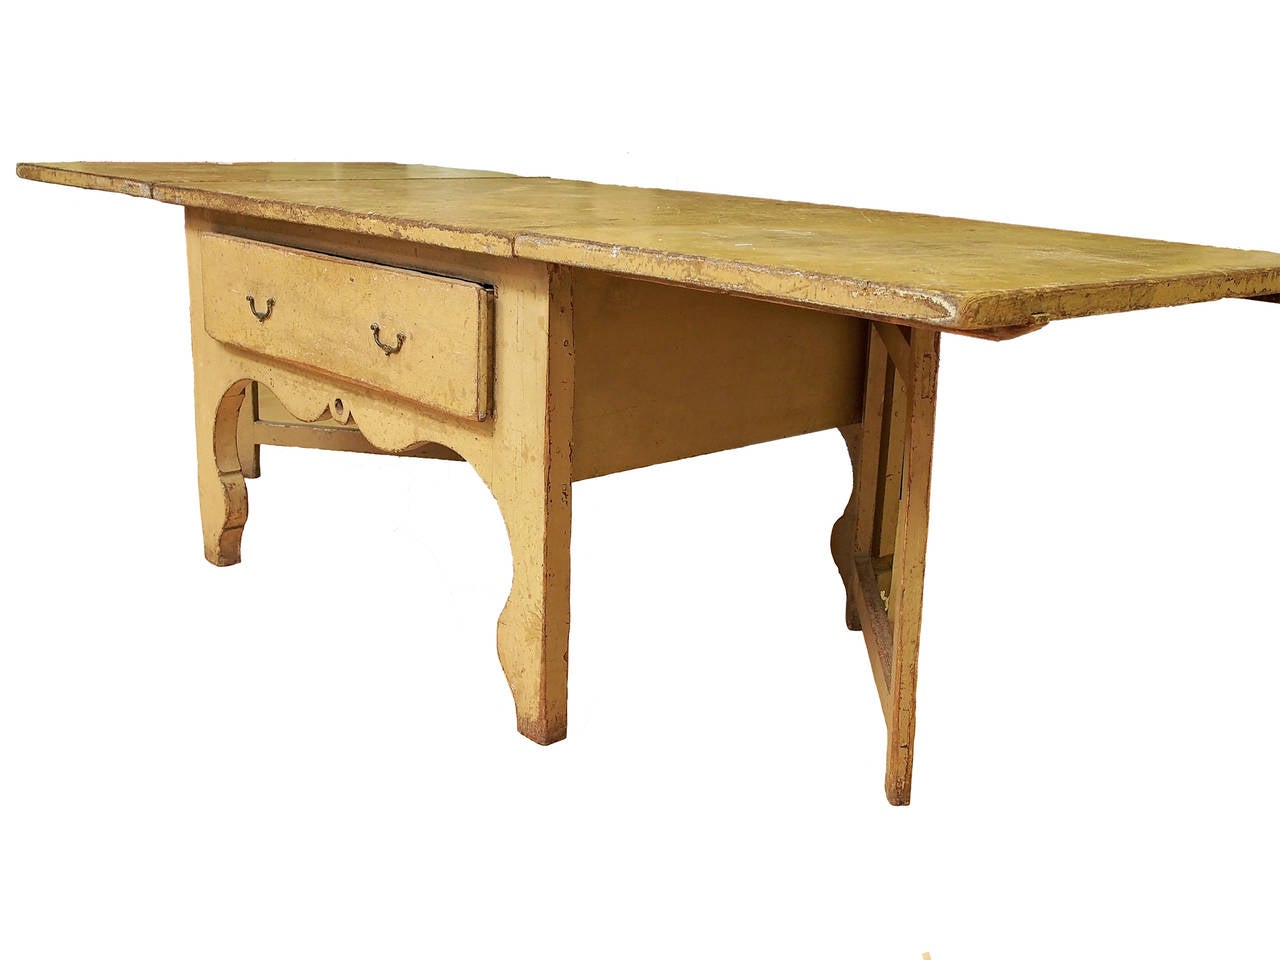 Beautiful oversized 18th century rustic Swedish Rococo farmhouse table. Original paint with aged ochre patina. Two drop-leafs with single drawer offers many possibilities for uses.

Dimensions: 29 3/4